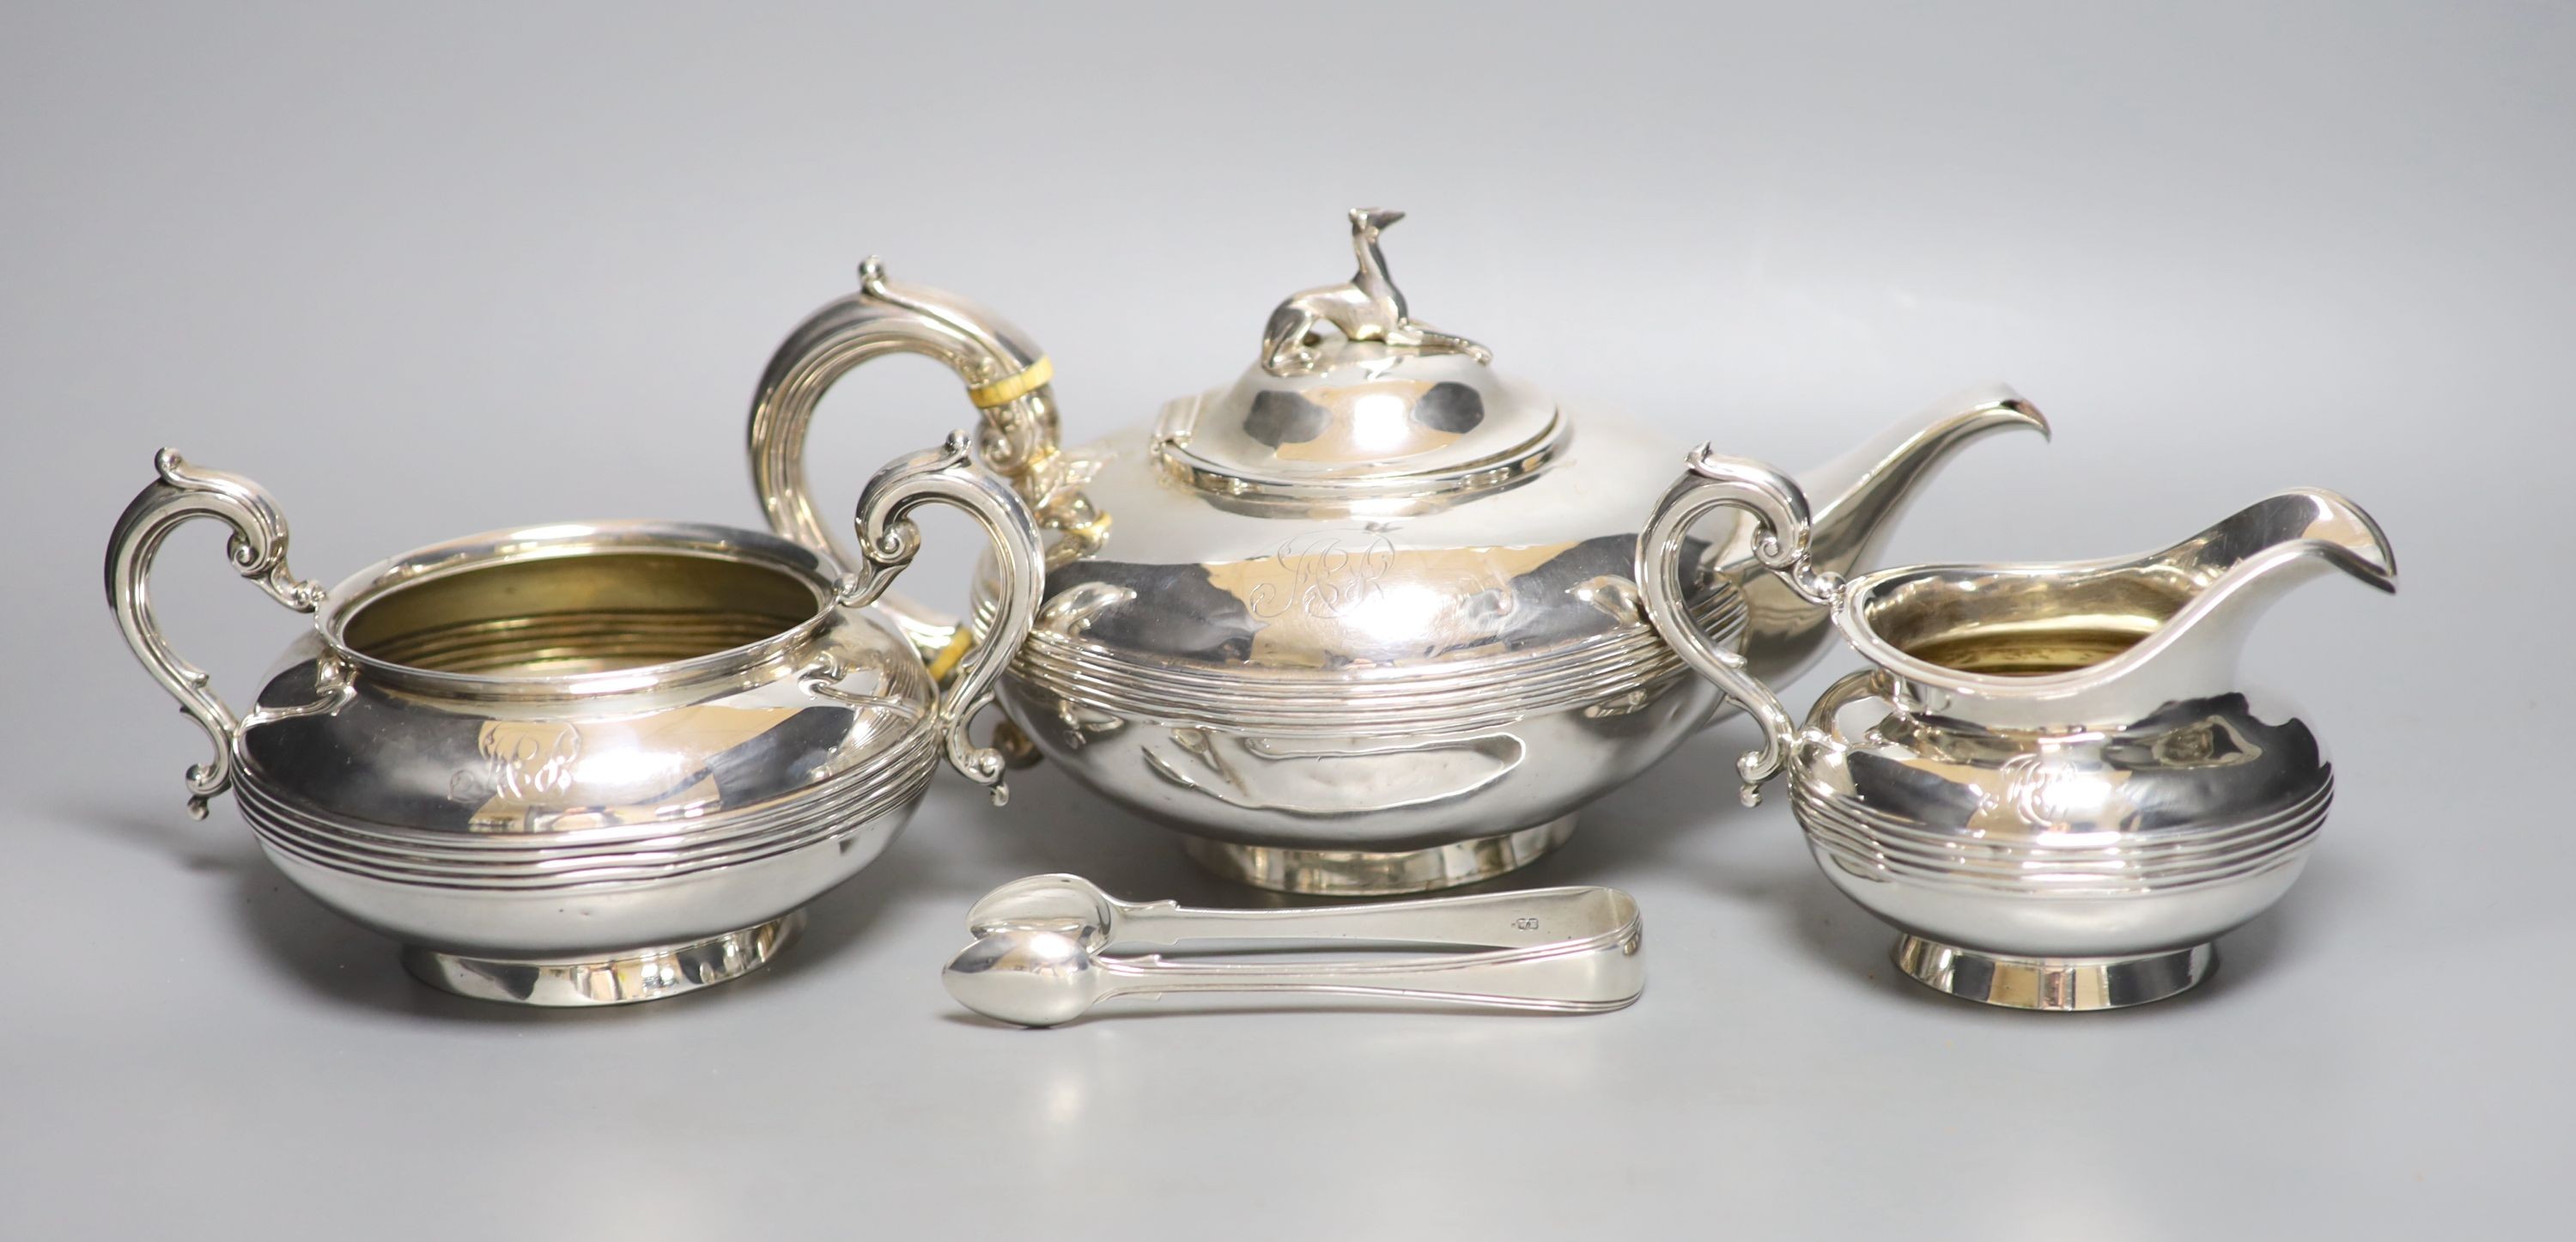 A Victorian silver three piece silver tea set, William Smily, London, 1856 and a pair of earlier silver sugar tongs, gross weight 40 oz.